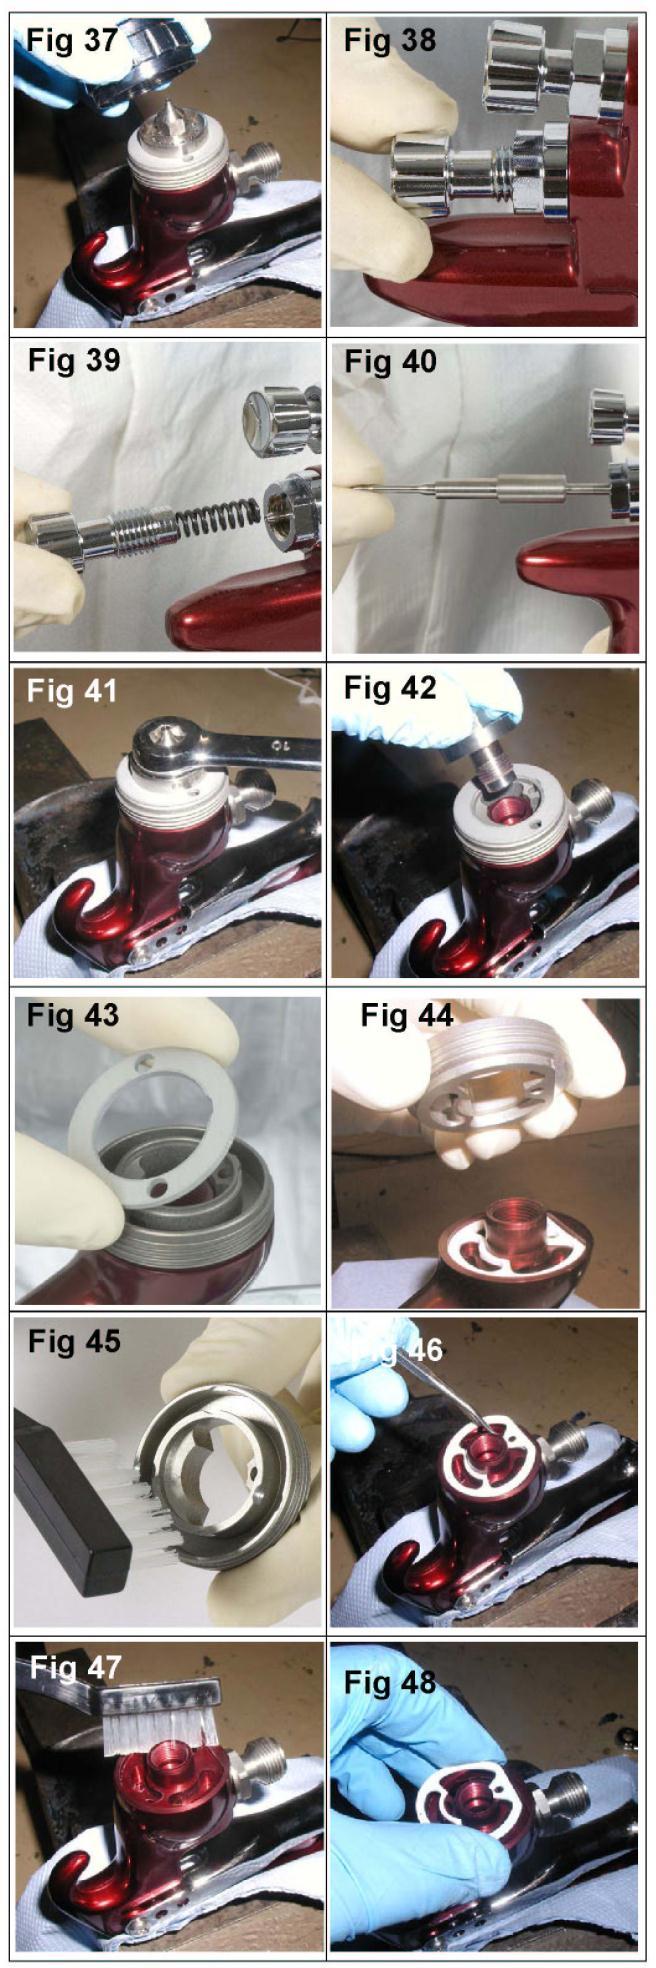 Parts Replacement/ Maintenance SPRAY HEAD SEAL REPLACEMENT 1. Remove air cap and retaining ring. (See fig 37) 2. Remove fluid adjusting knob, spring, and spring pad. (See figs 38 & 39) 3.